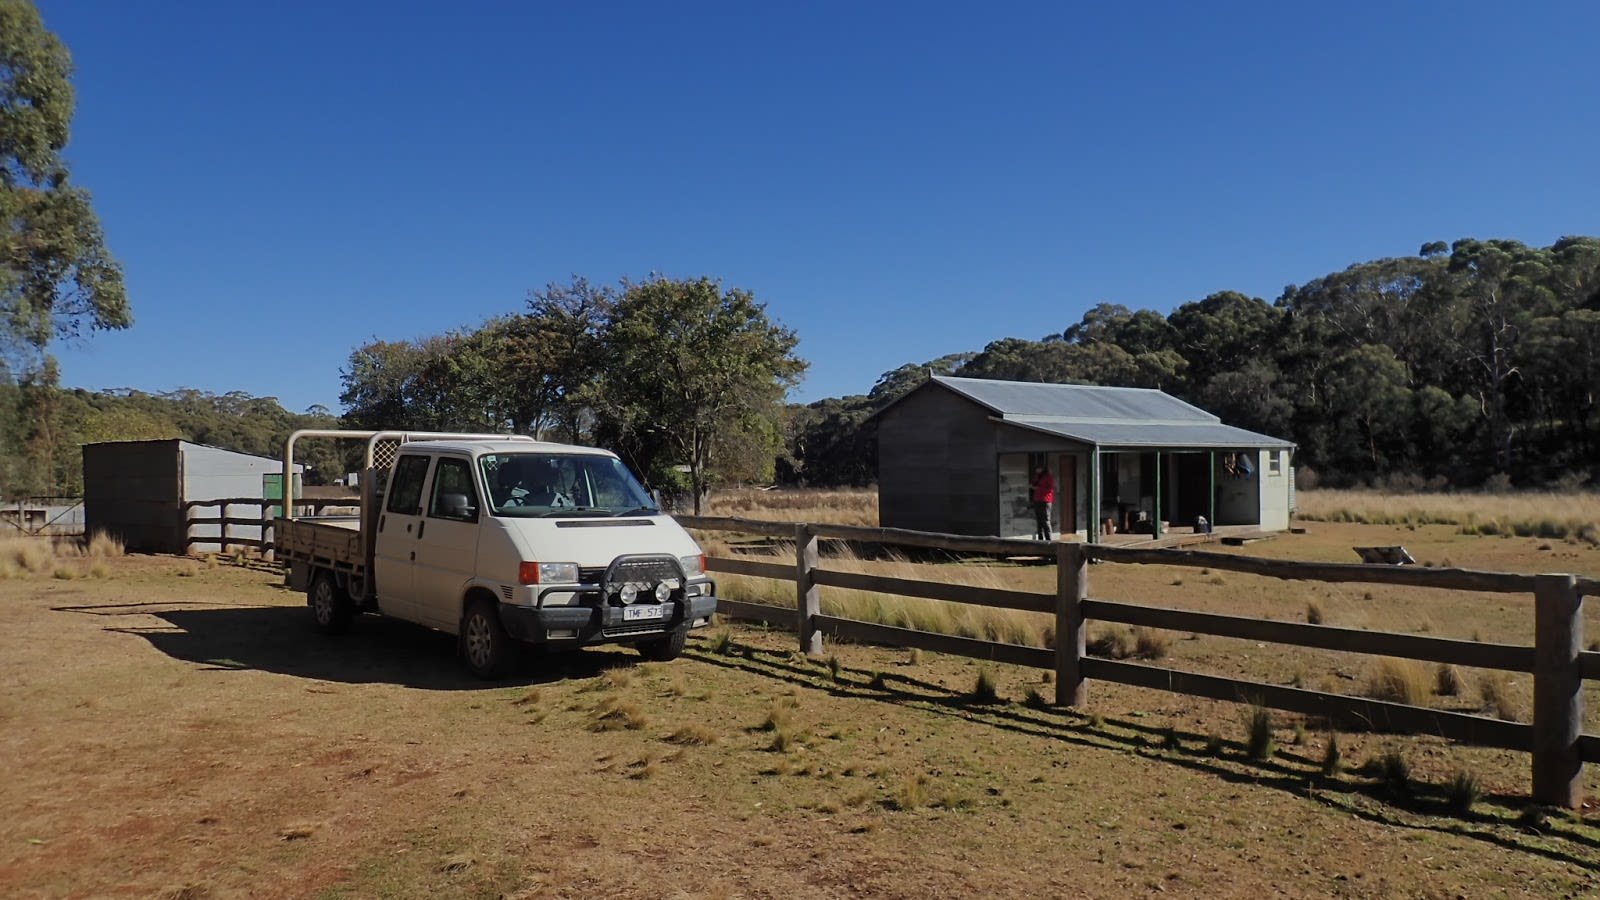 Bracken’s Hut with the mighty Transporter in the parking area. The building behind the vehicle is the stables.